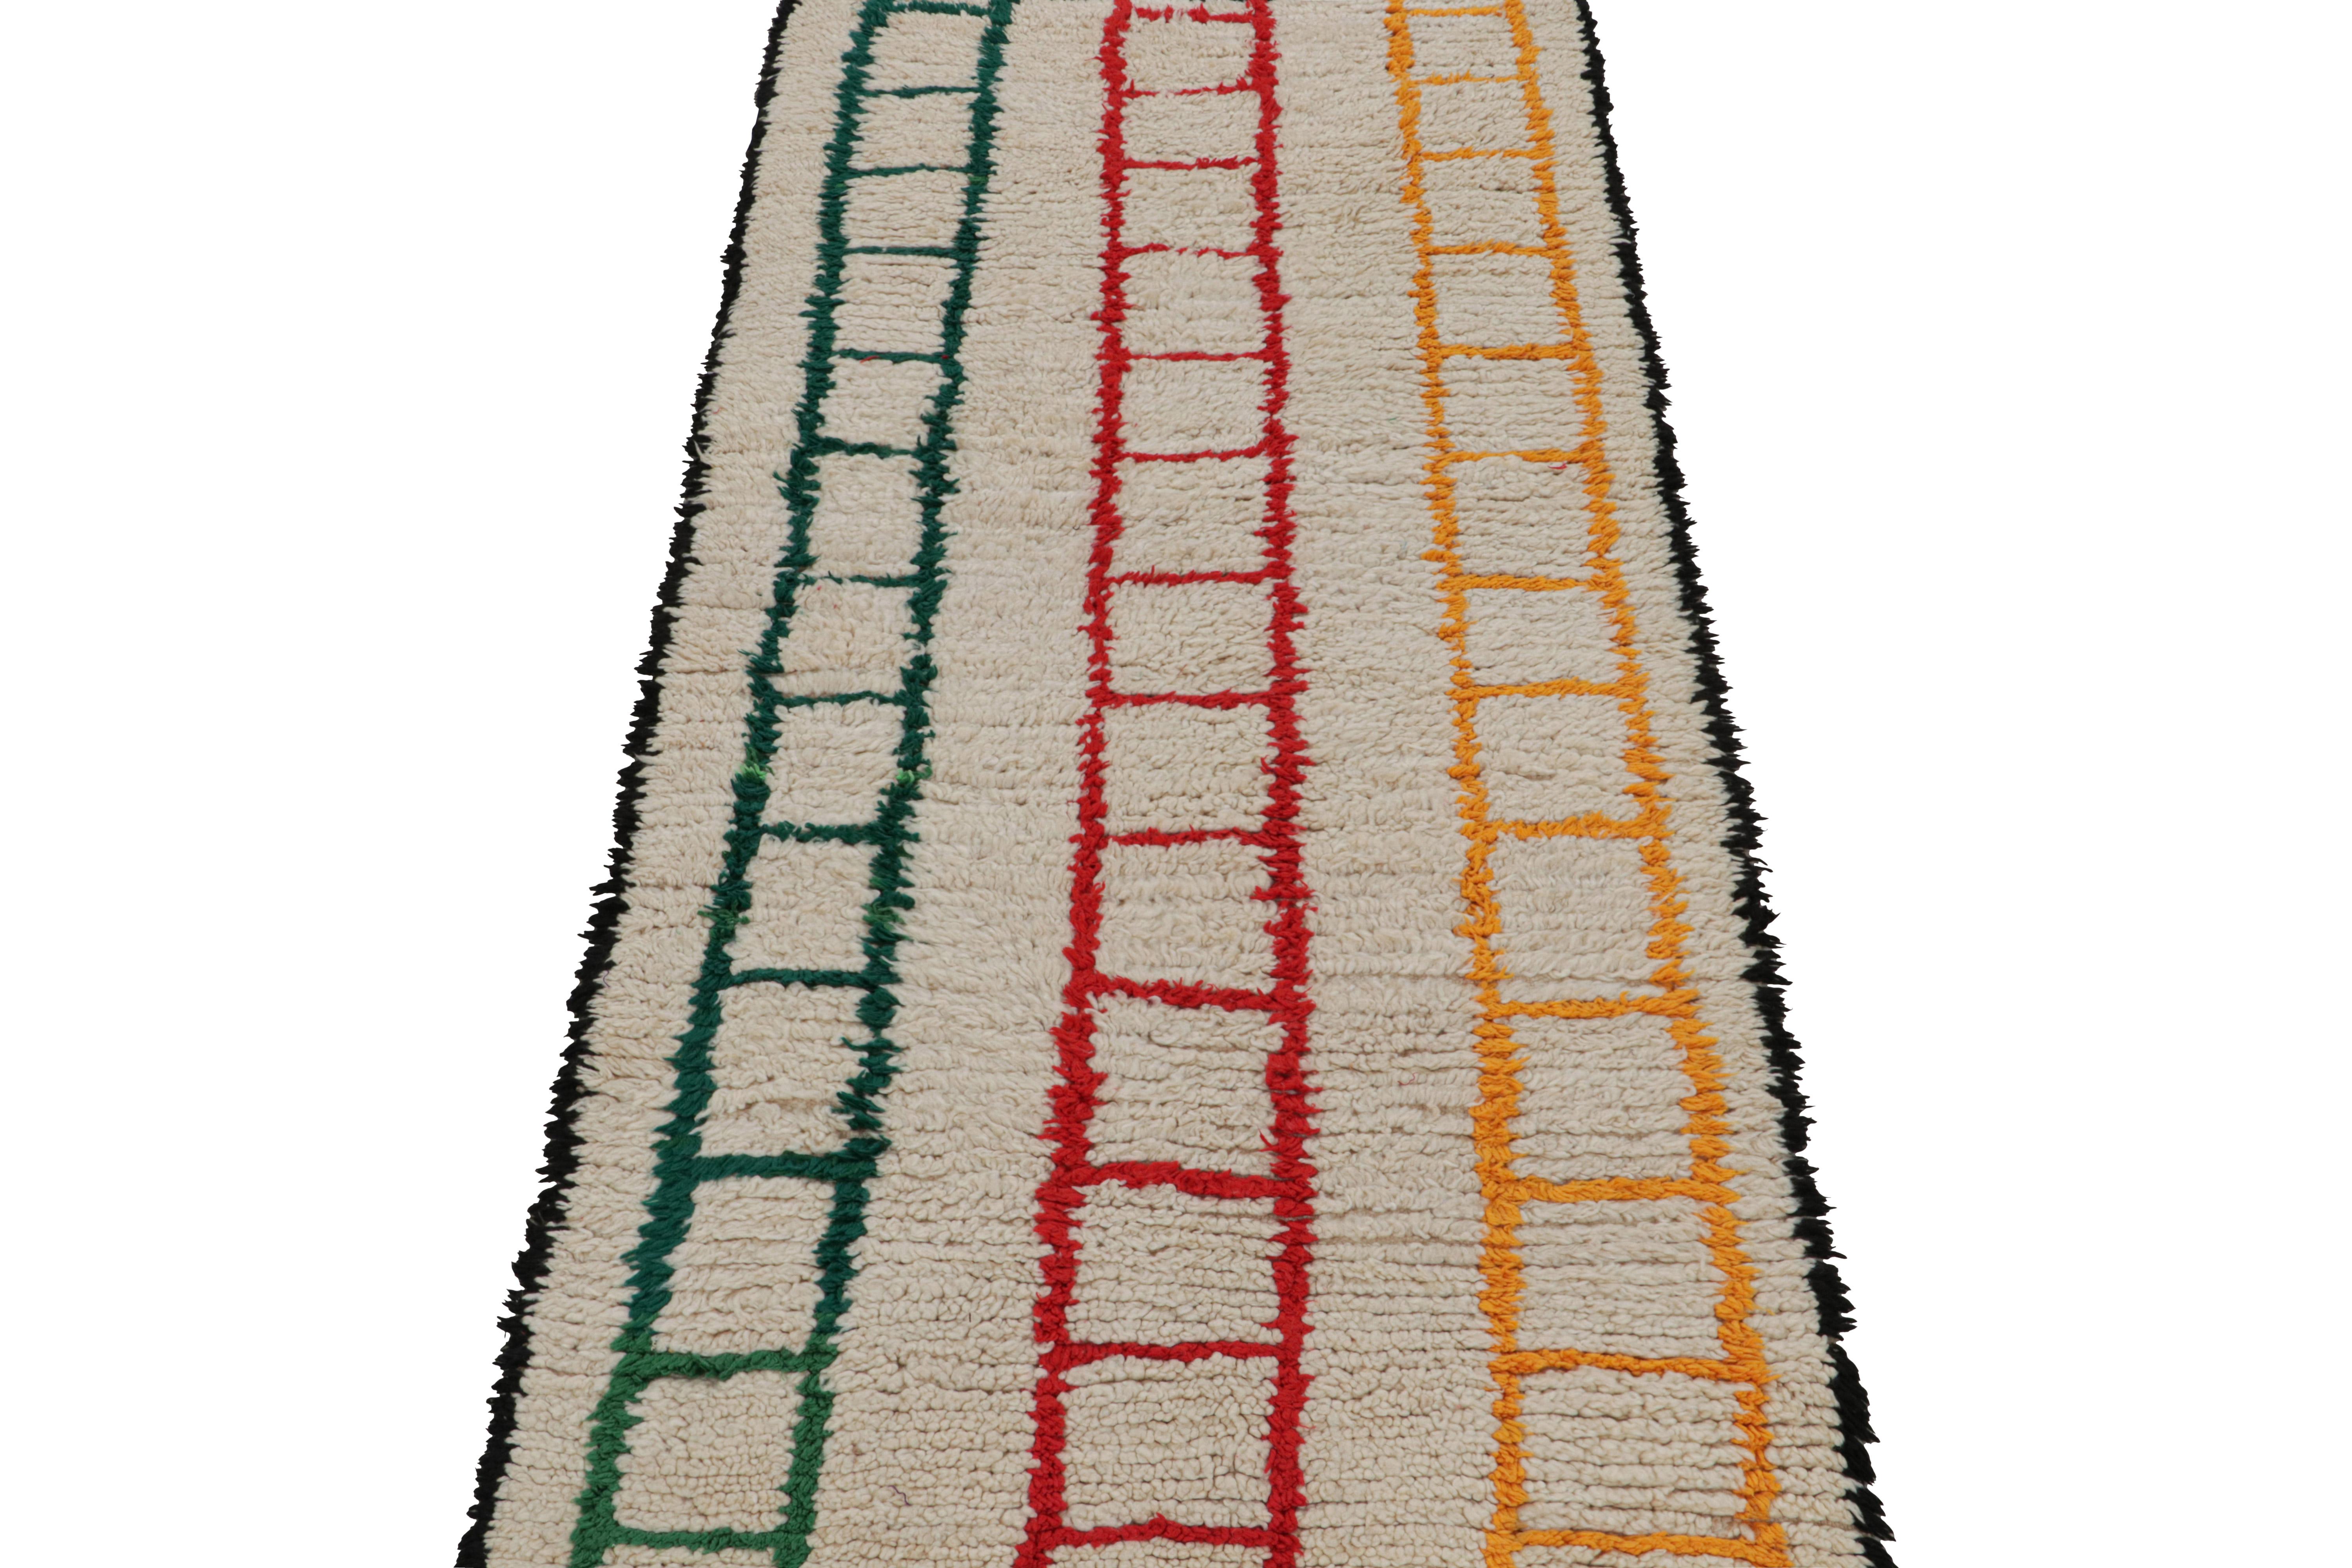 Tribal 1950s Azilal Moroccan runner rug in Cream Polychromatic Patterns by Rug & Kilim For Sale